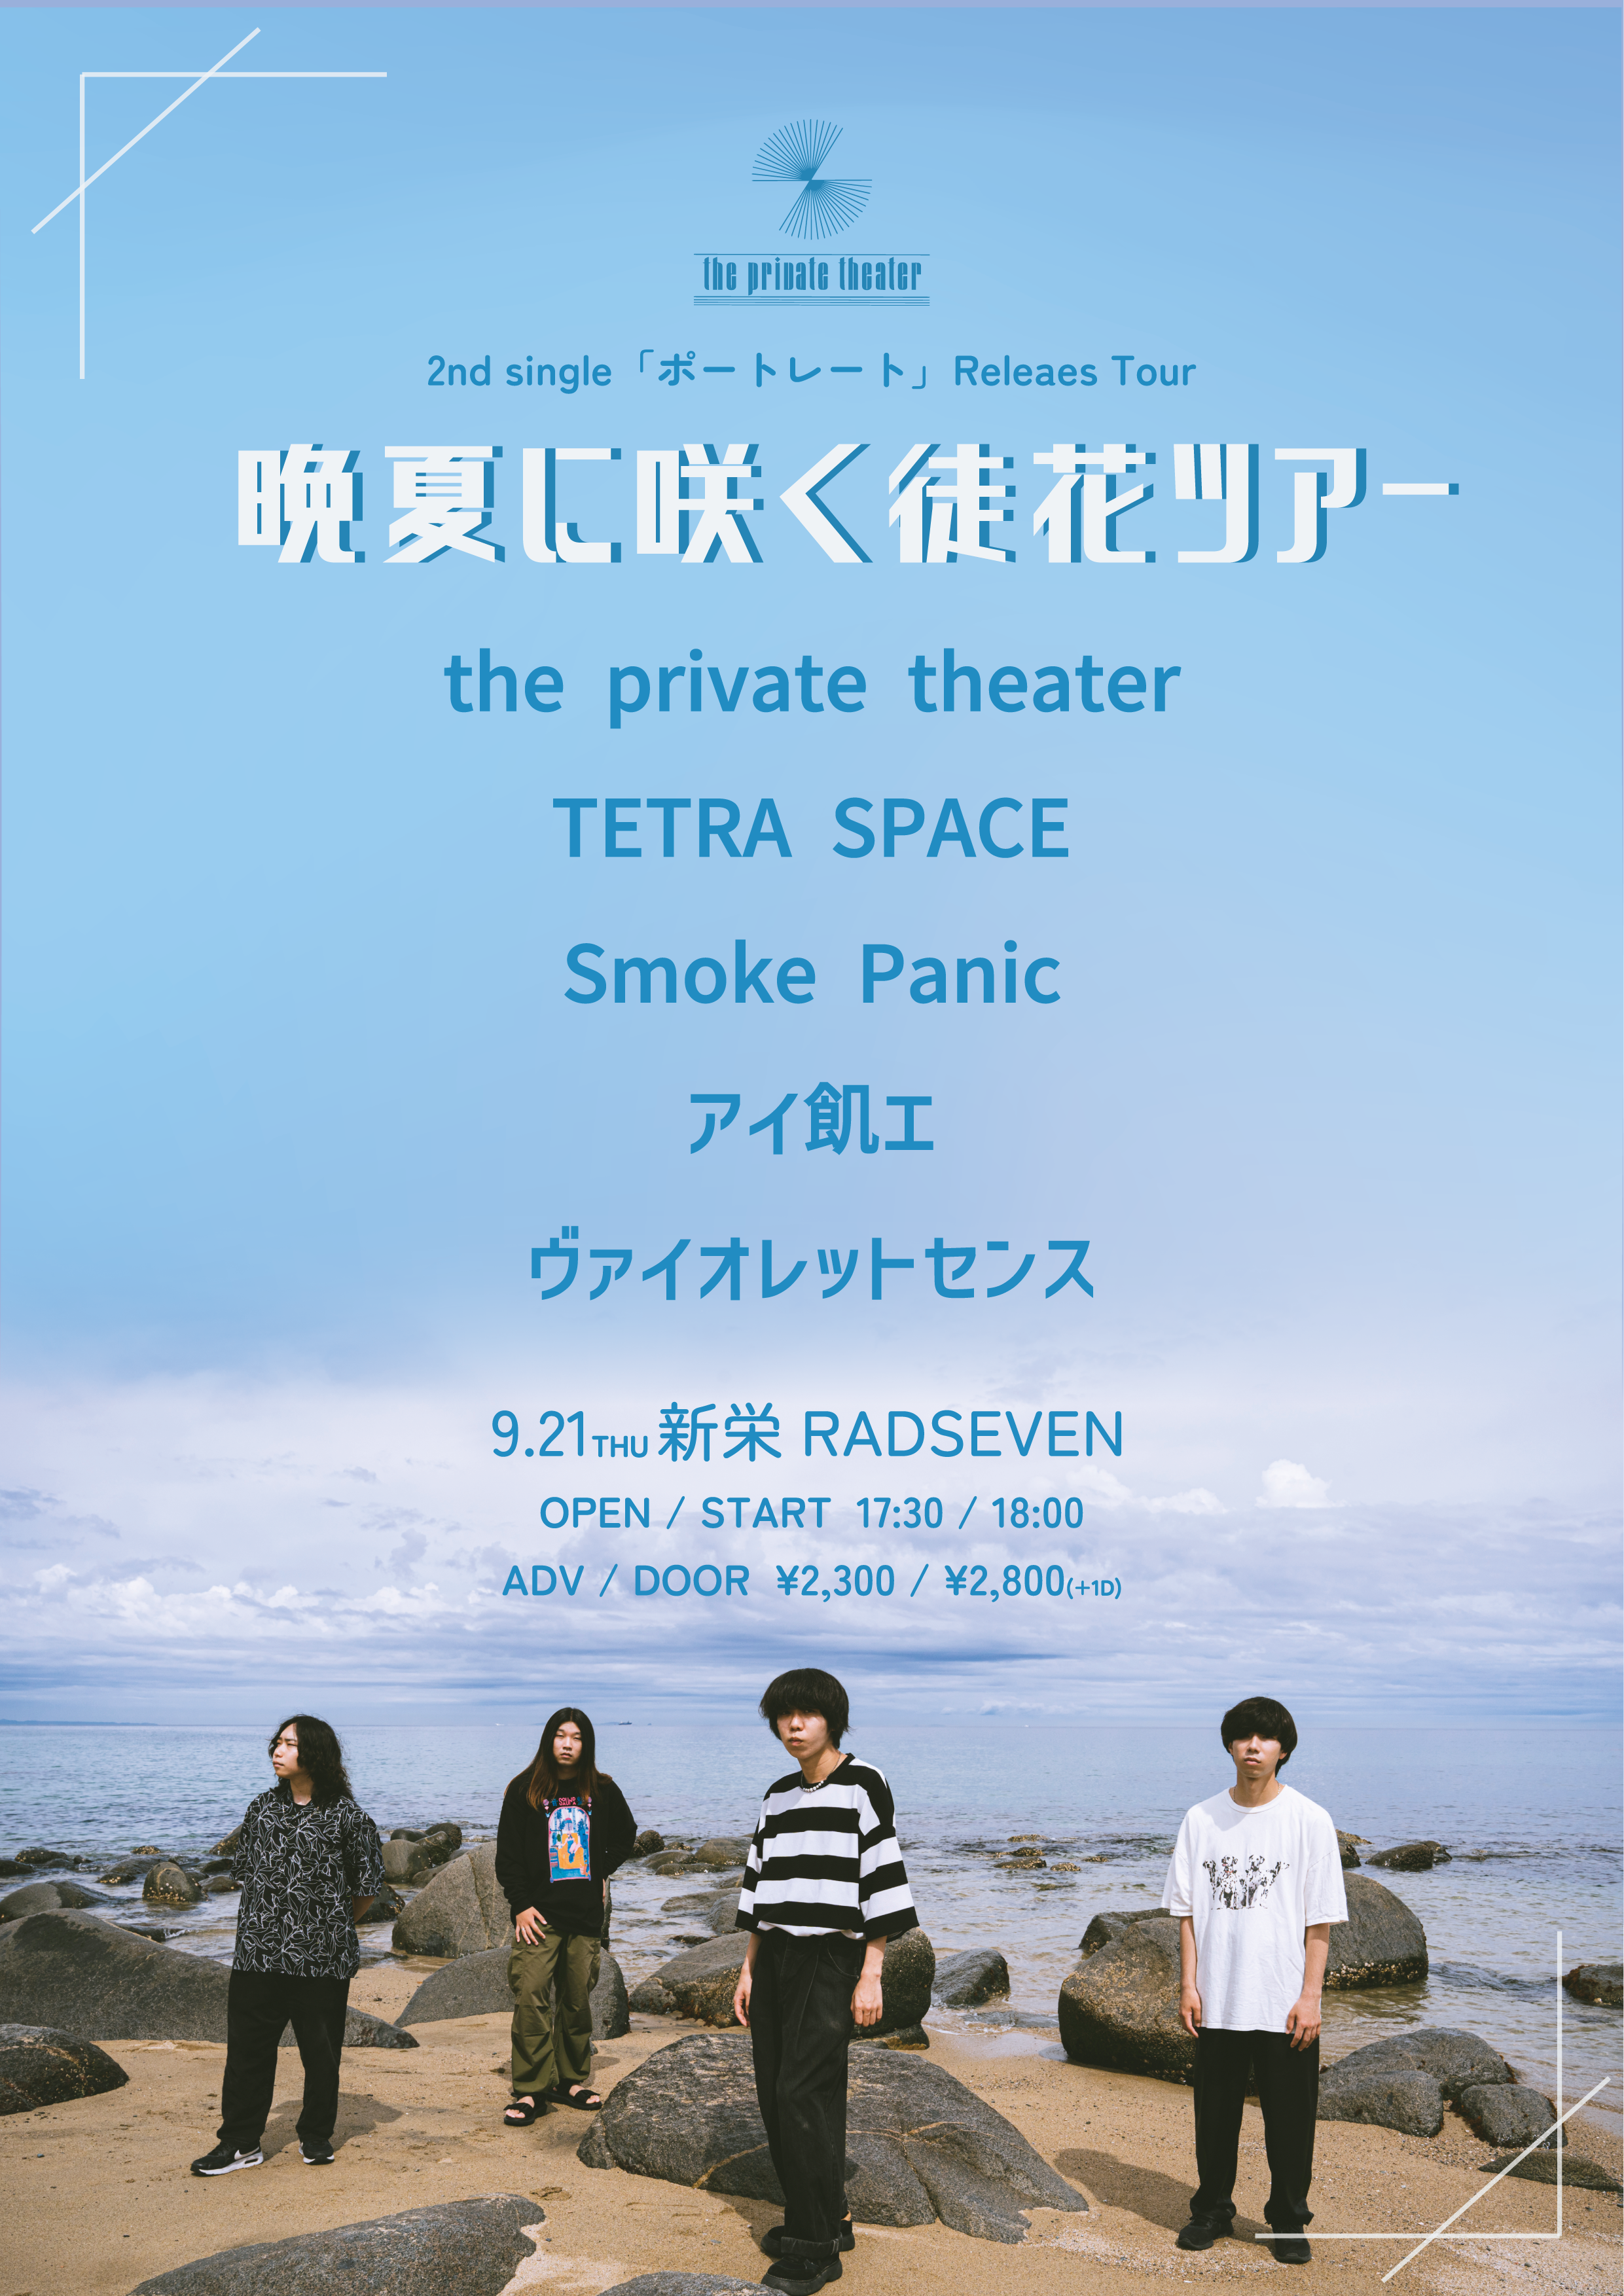 the private theater 2nd single「ポートレート」releaes tour 晩夏に咲く徒花ツアー